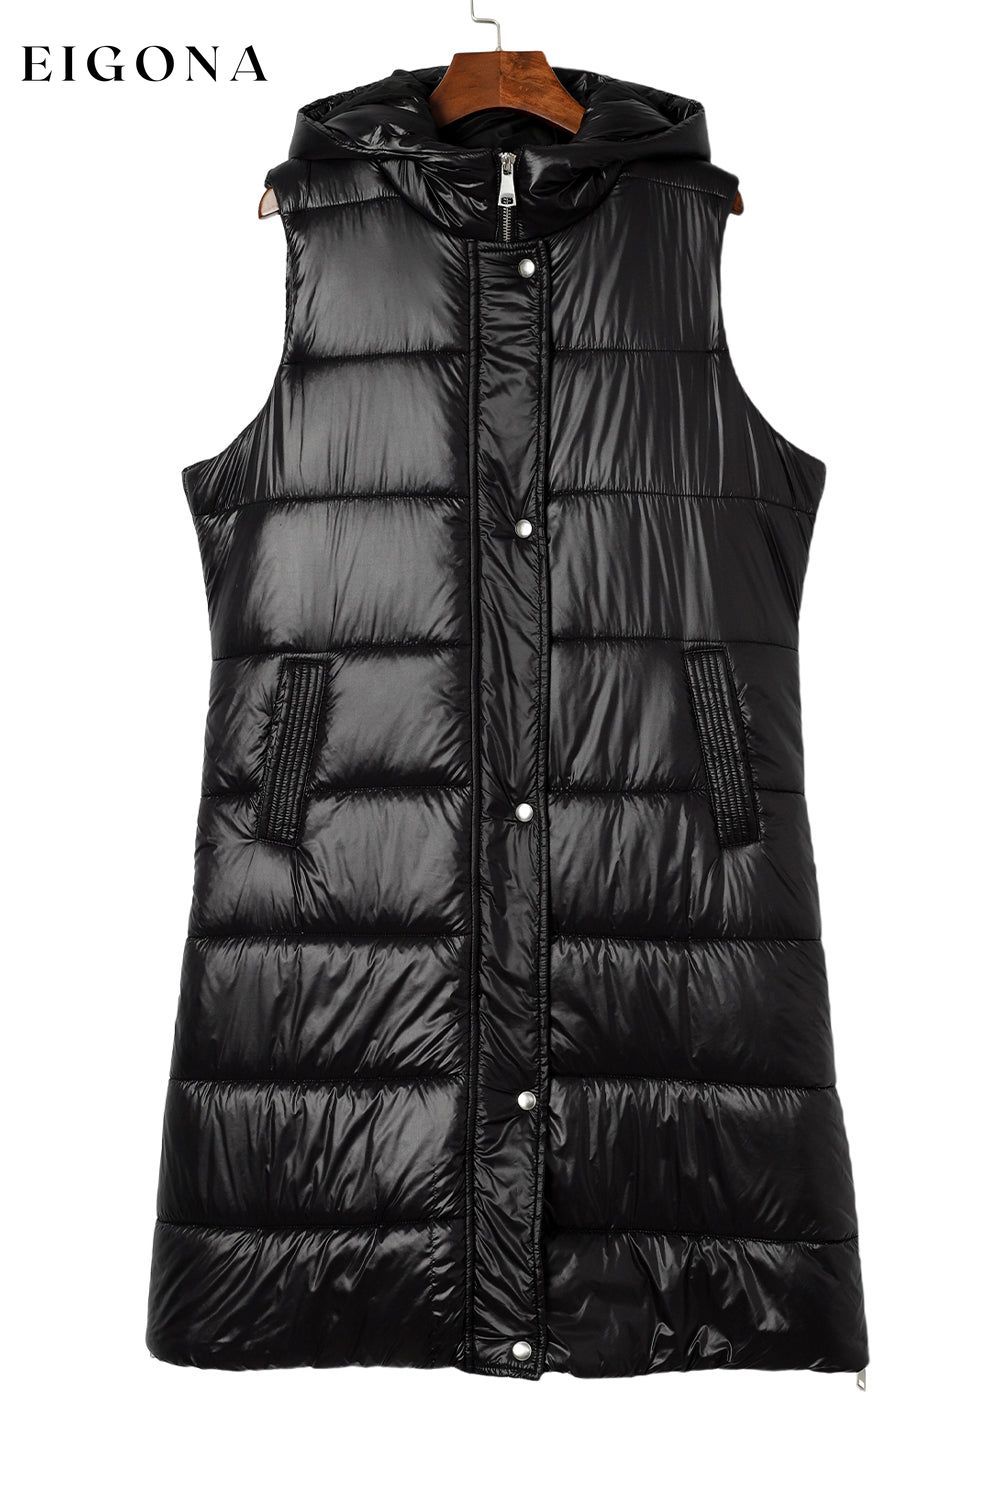 Black Hooded Long Quilted Vest Coat All In Stock Best Sellers clothes Craft Quilted DL Chic DL Exclusive EDM Monthly Recomend EDM Warm Jacket Jackets & Coats long vest Occasion Daily Print Solid Color puffy vest Season Winter Style Casual